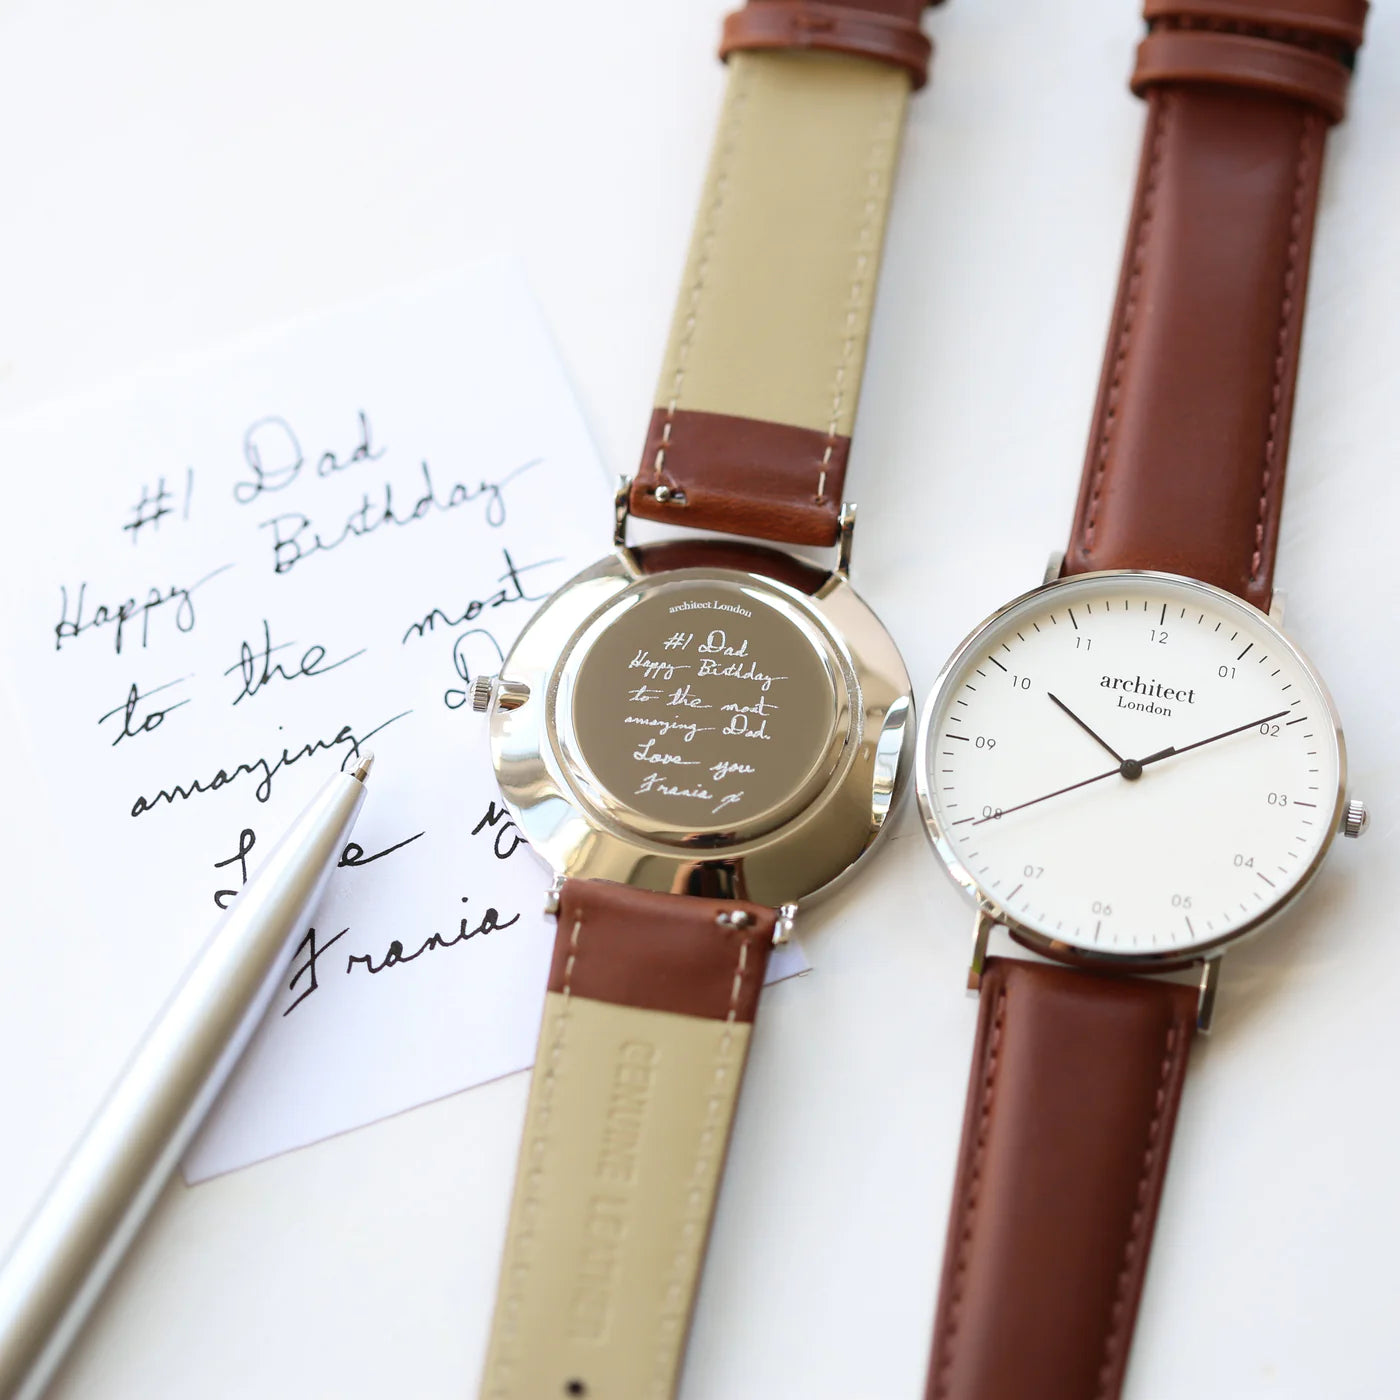 Image of a men's Architect Zephyr watch with an off white face and a walnut leather strap. The rear of the watch can be engraved with your own handwritten message or drawing.